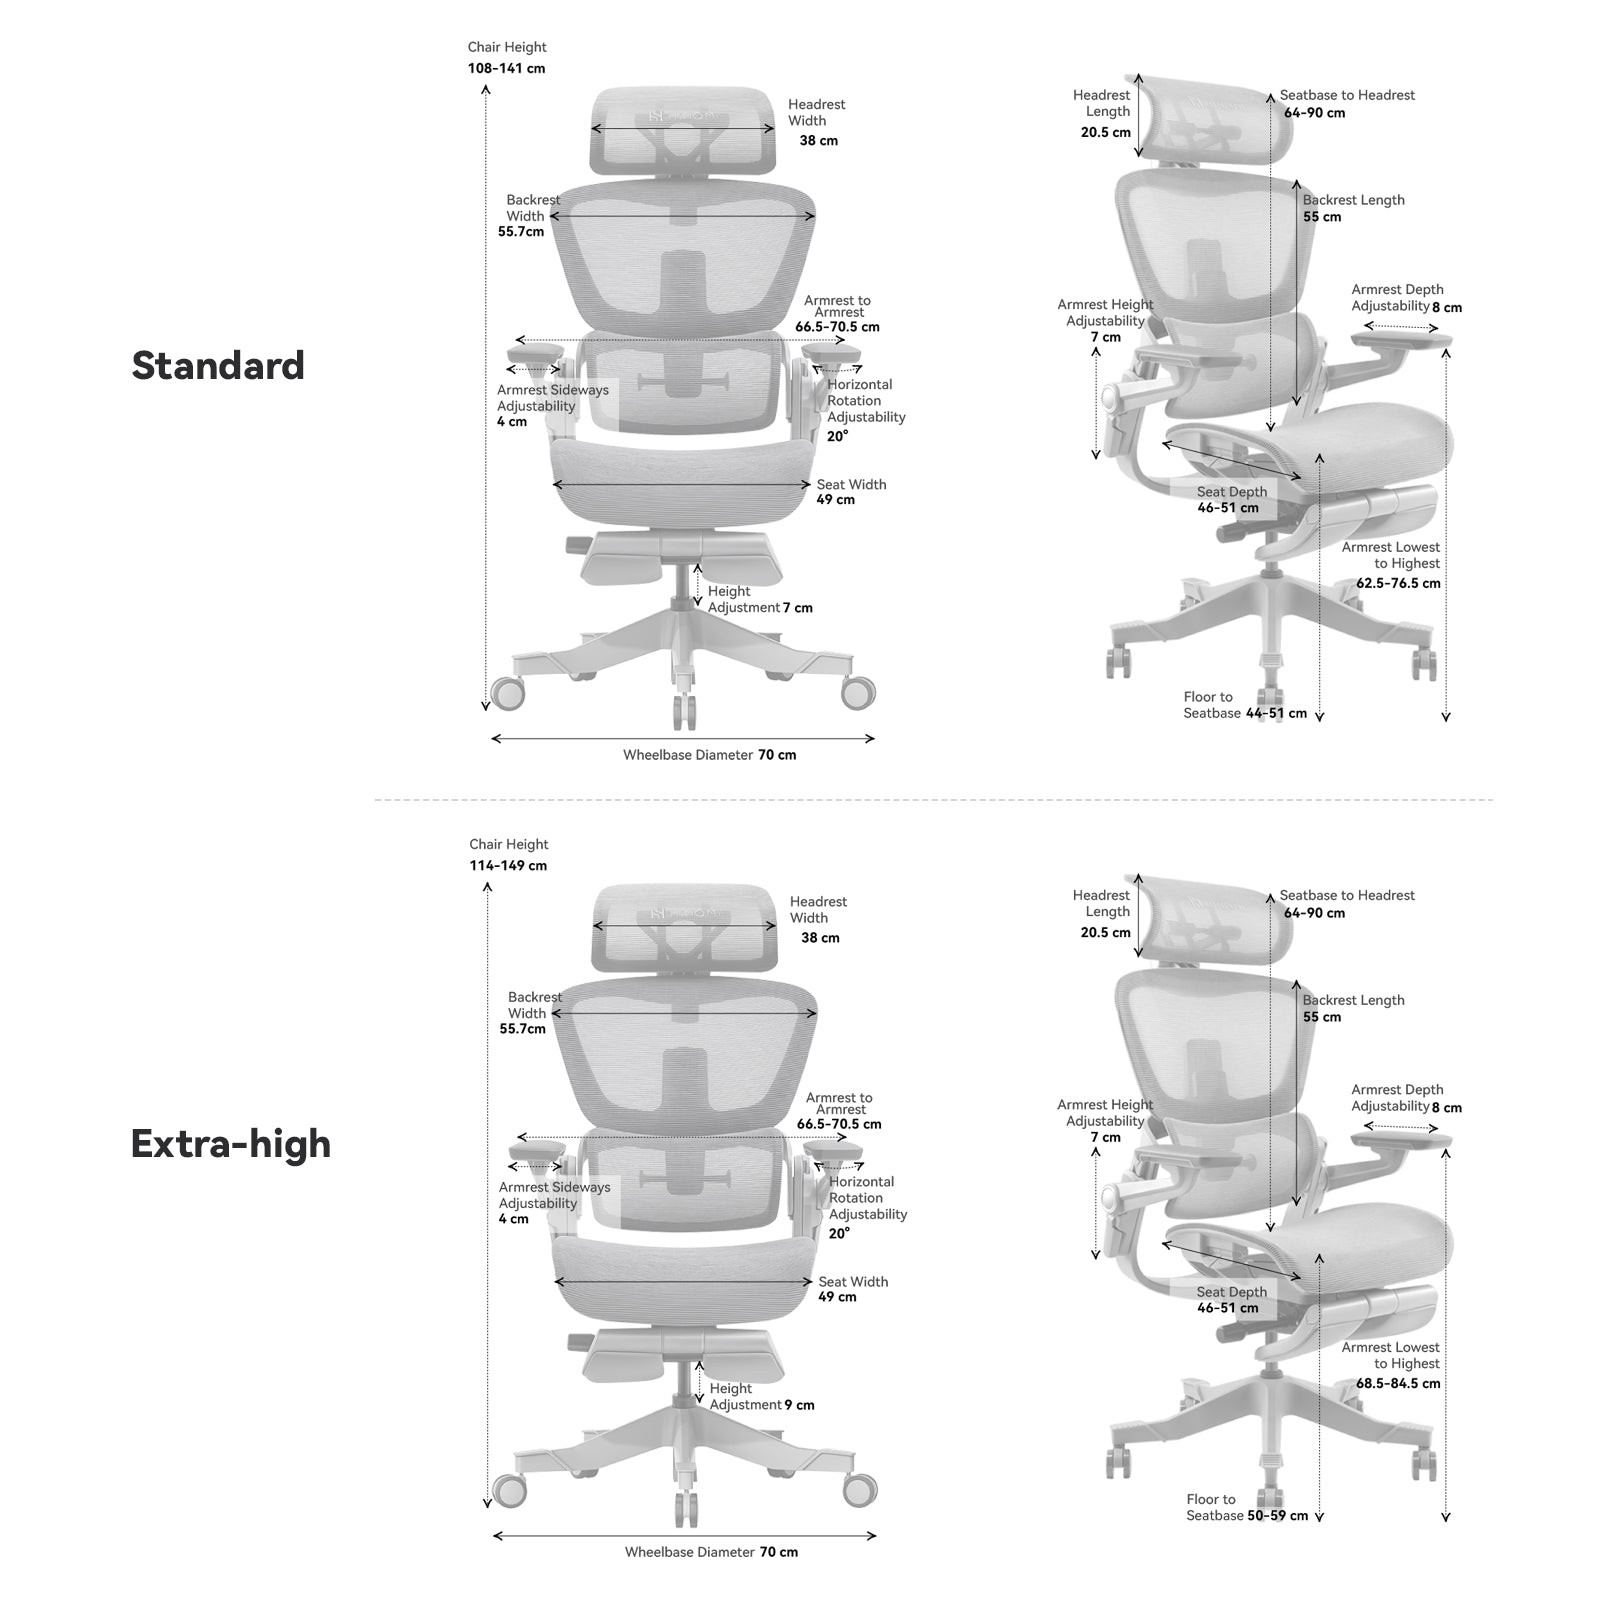 H1 Pro Ergonomic Office Chair with Fantastic Lumbar Support – HINOMI SG